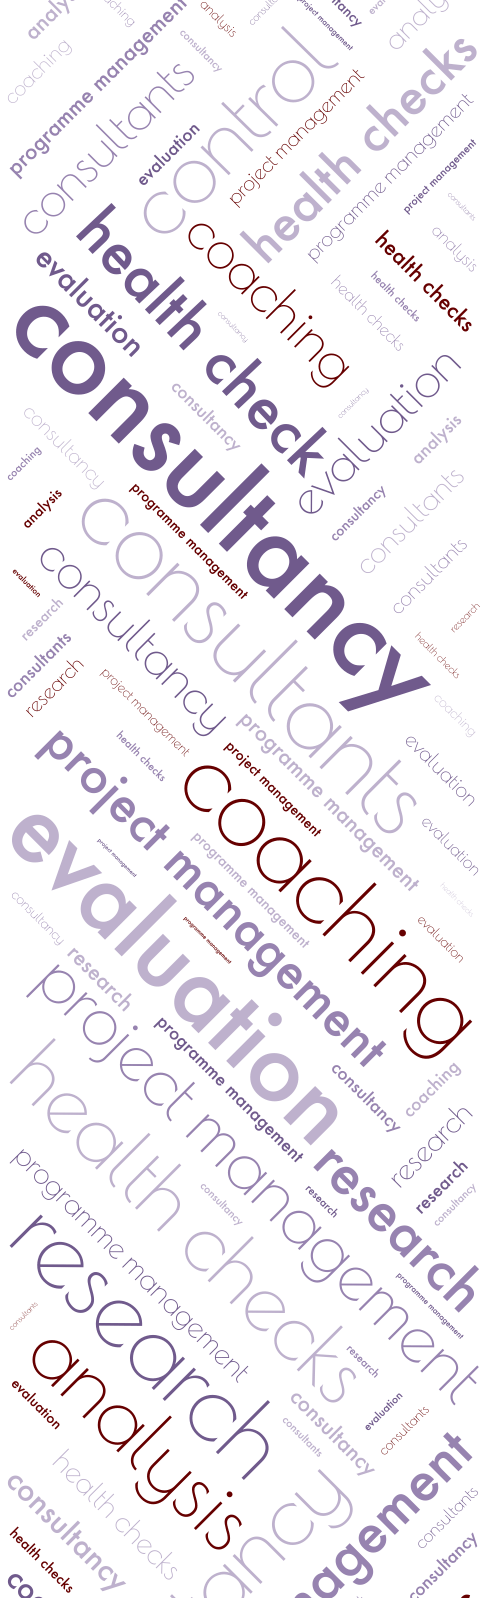 wordcloud depicting services we offer